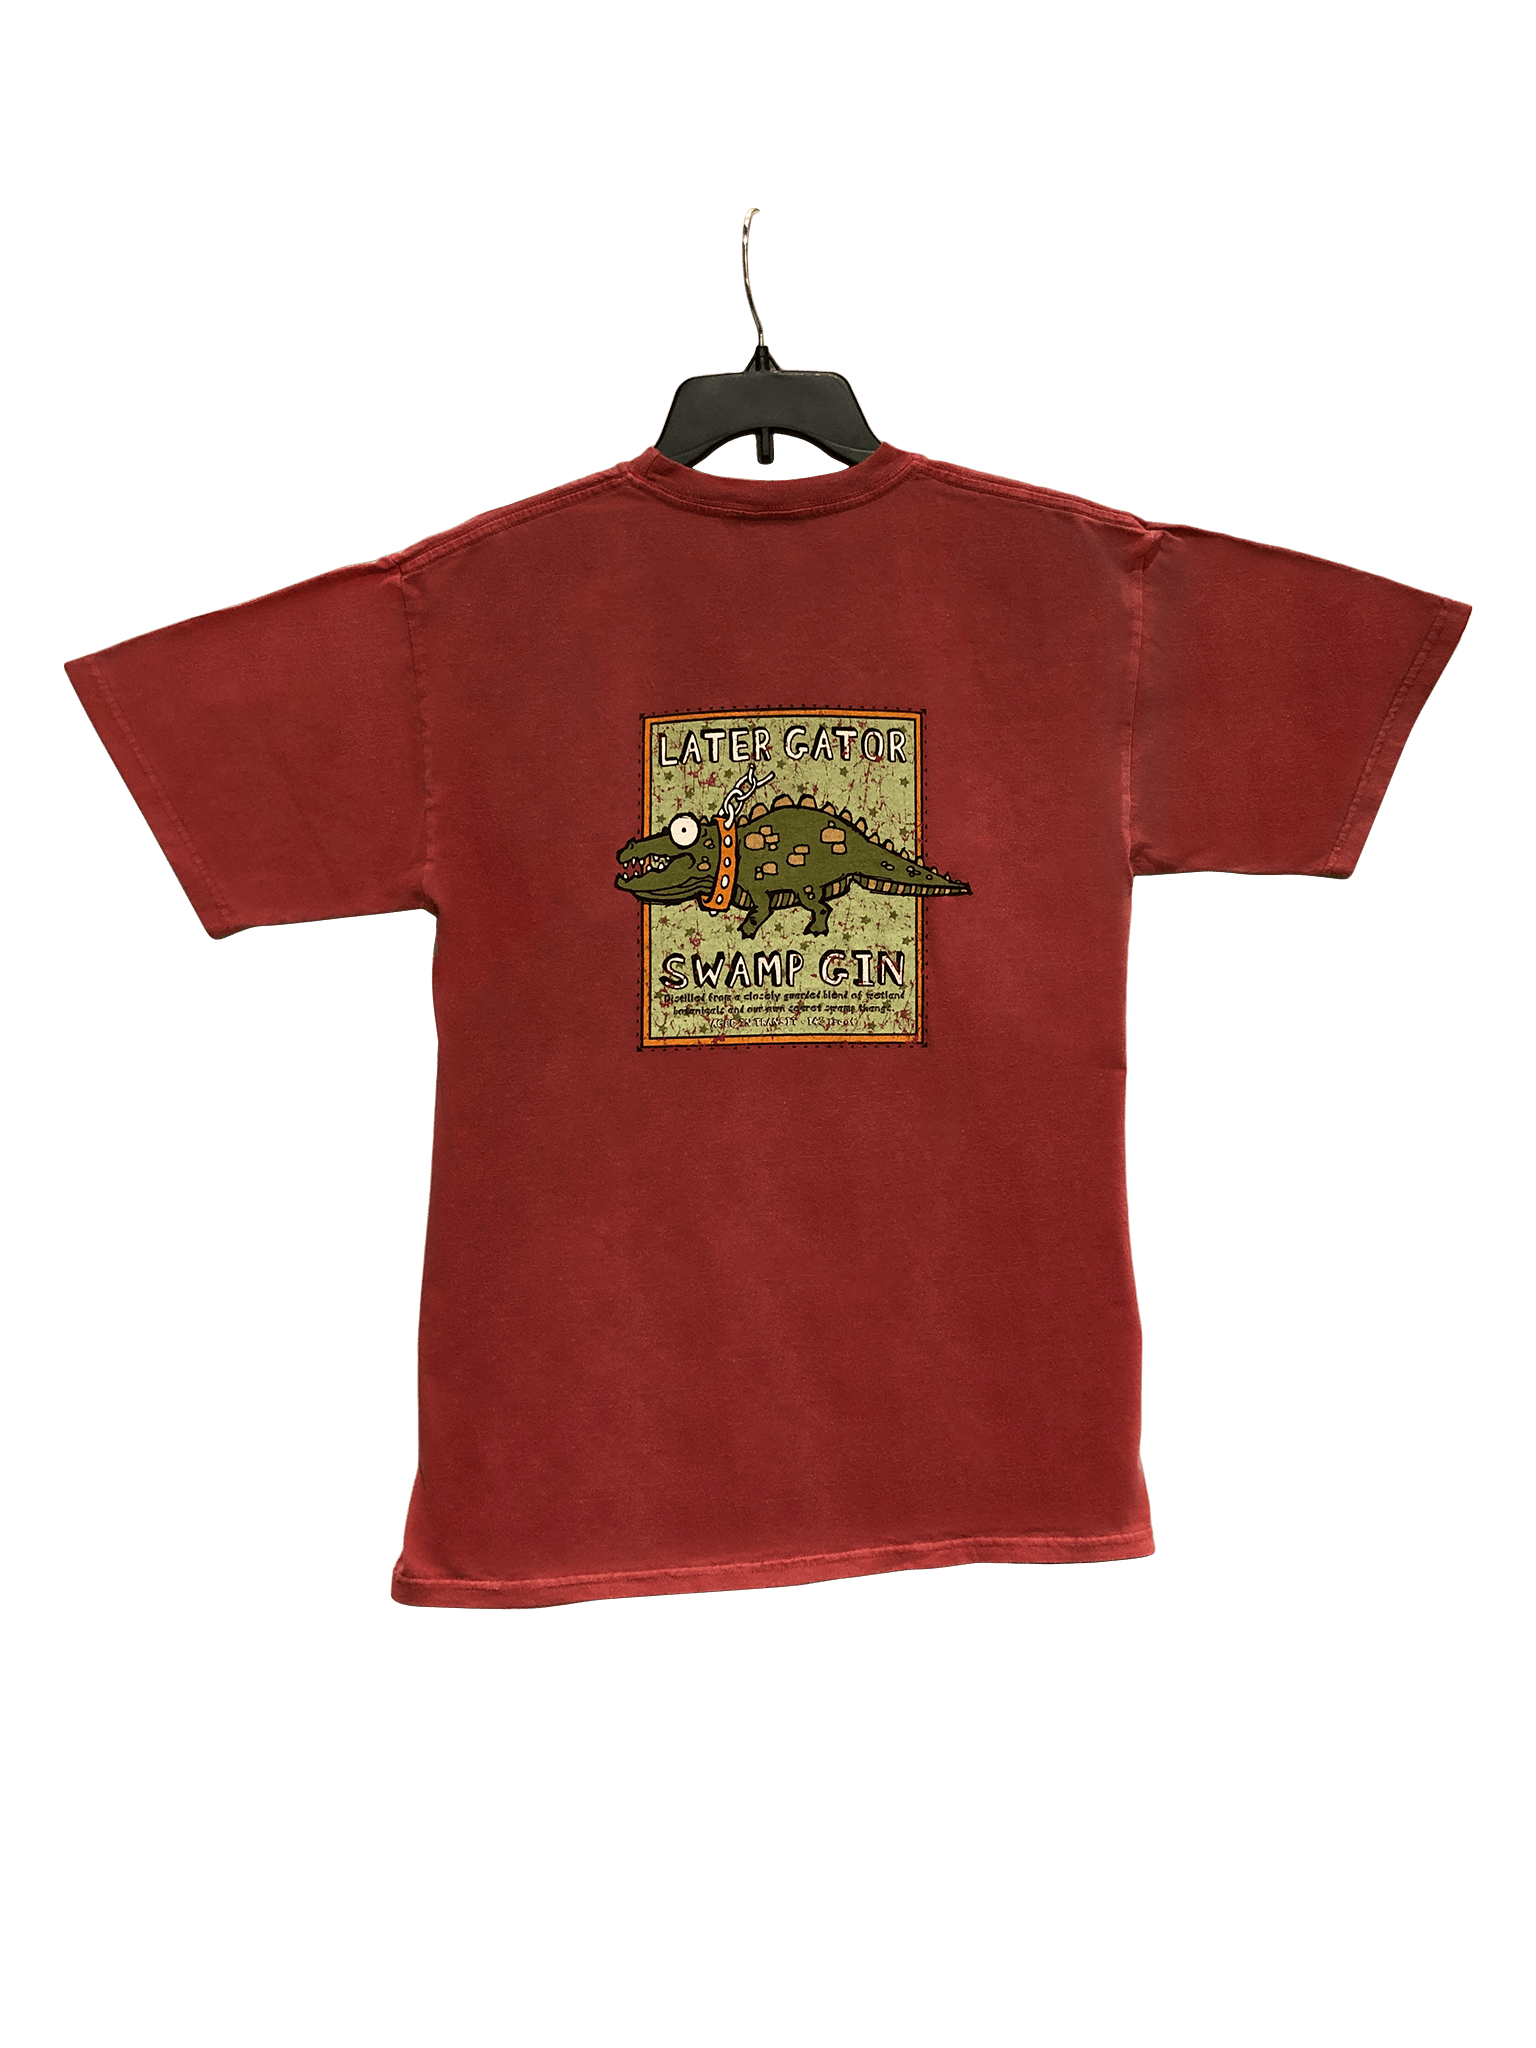 Only a few of these shirts left! -Red and Green - Later Gator Swamp Gin T-Shirt (Adult)